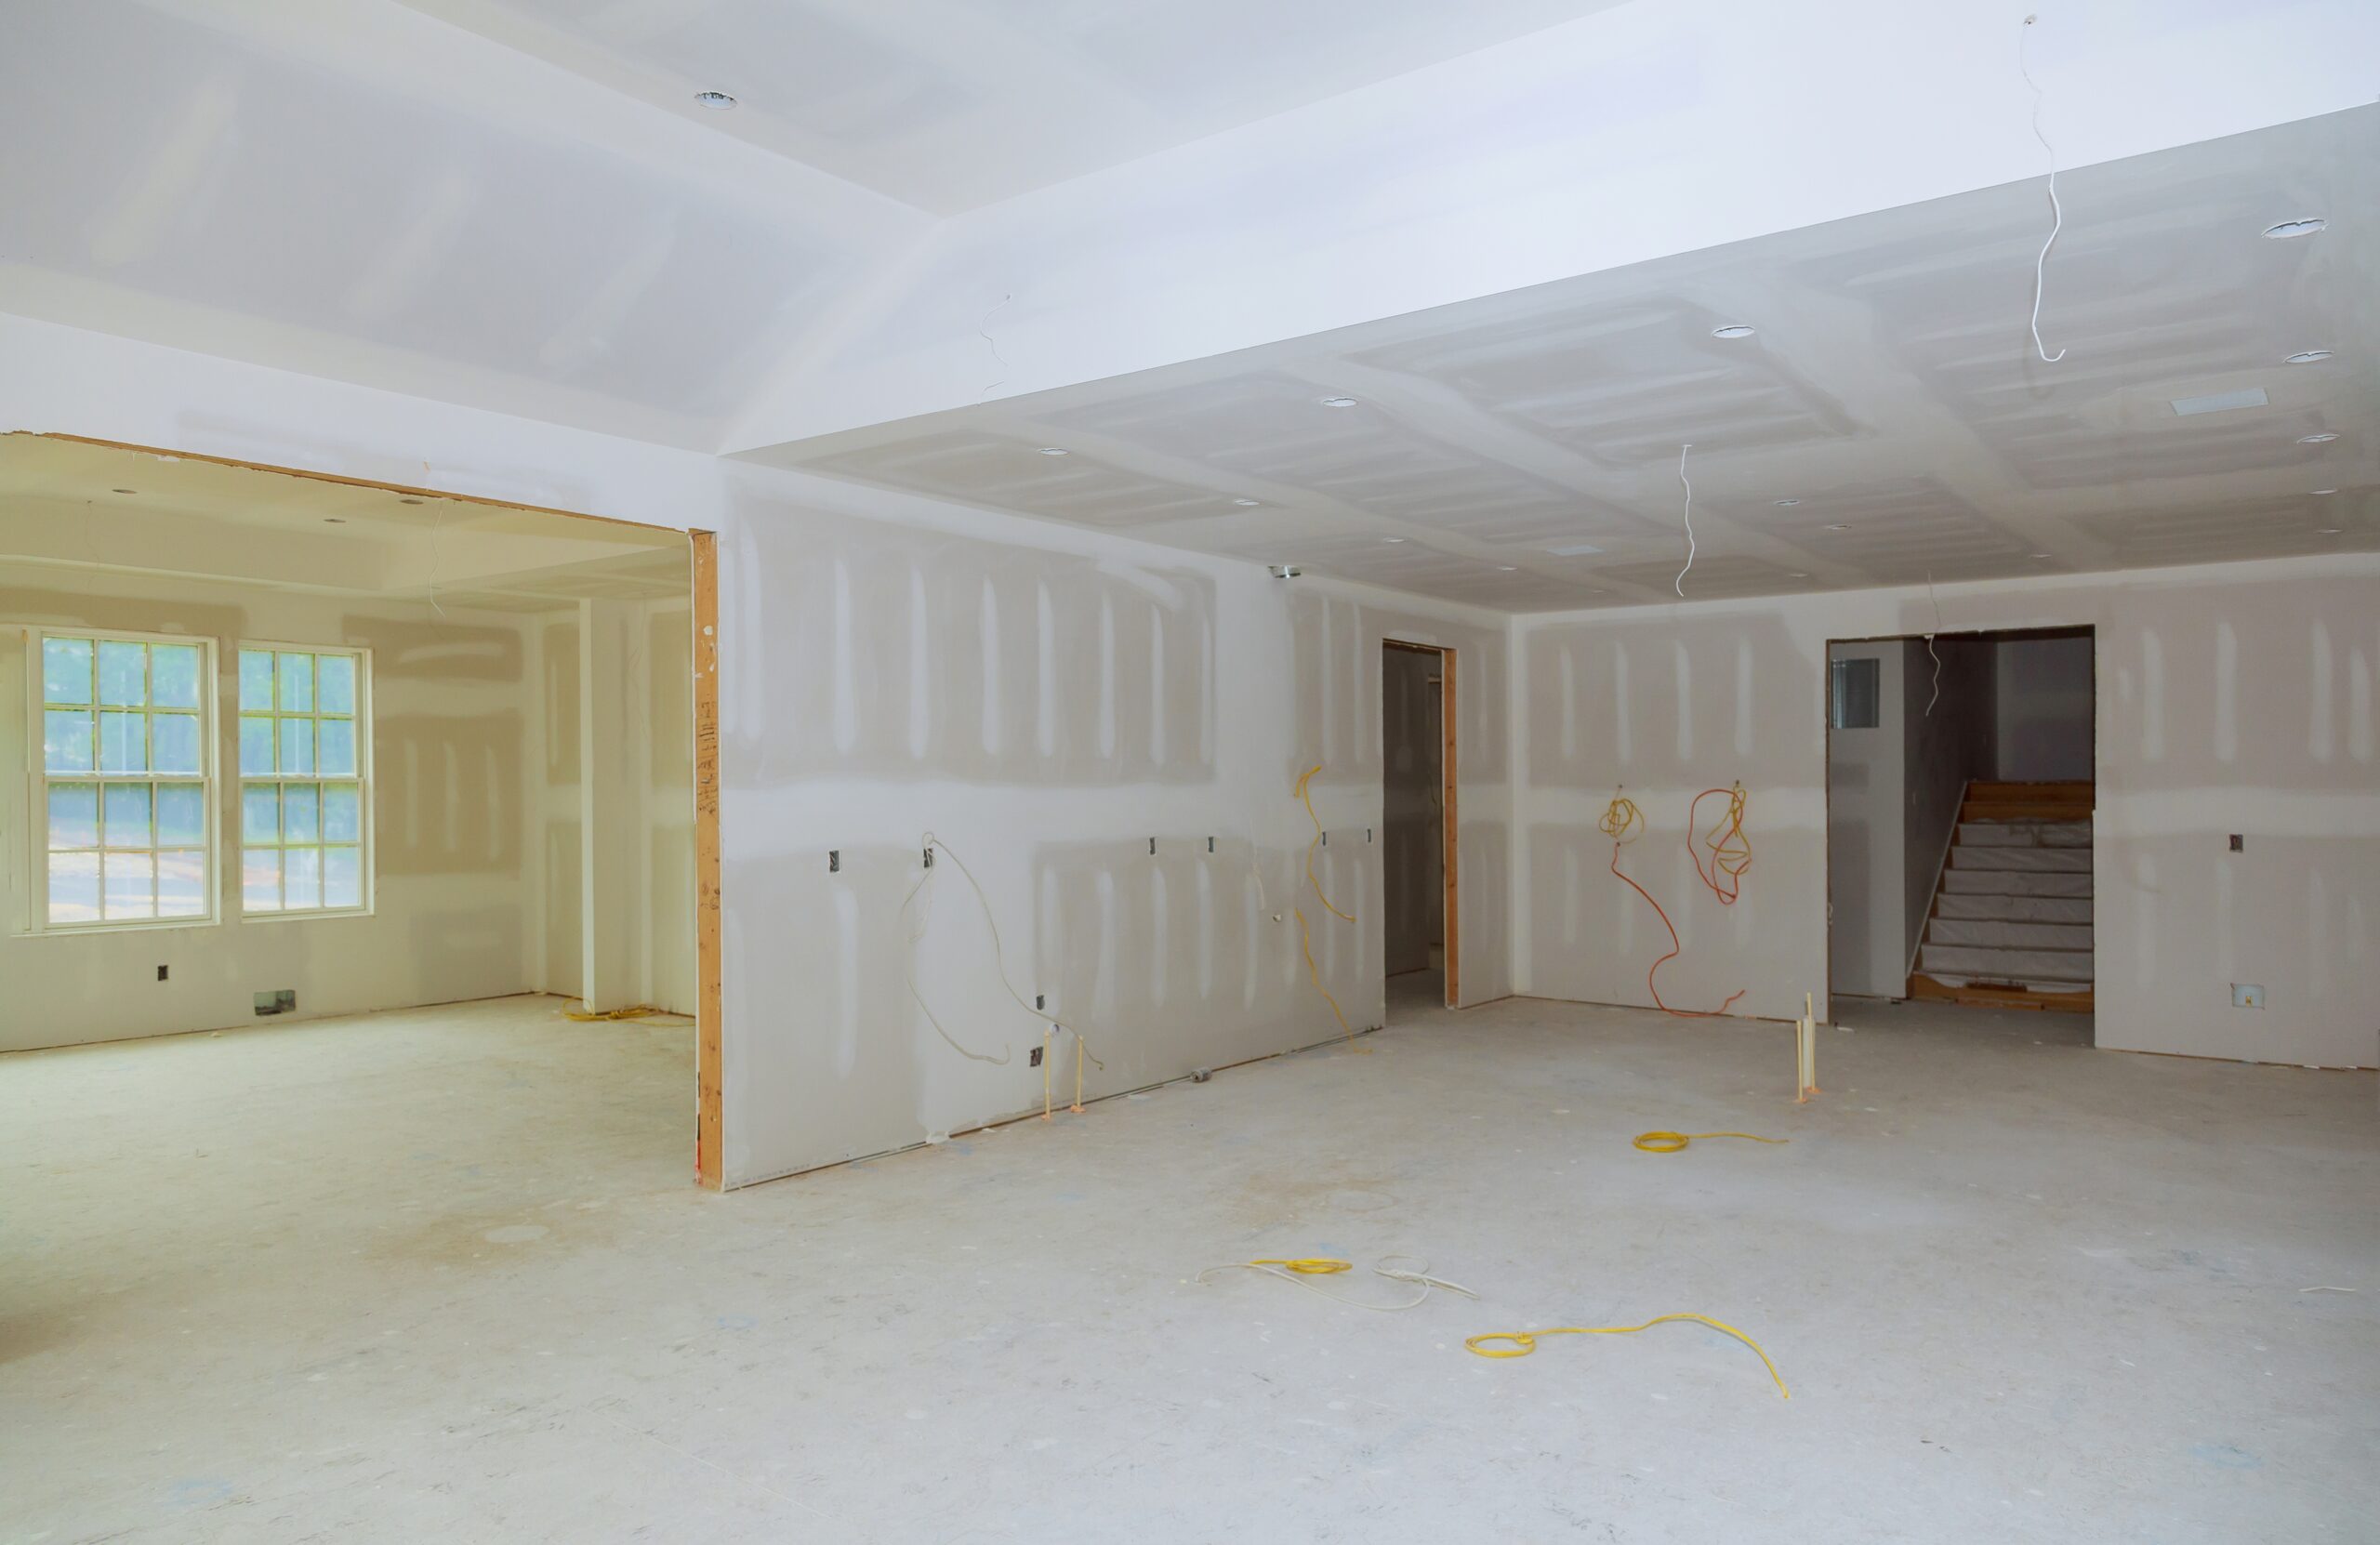 Construction finish details drywall tape building industry new home construction interior